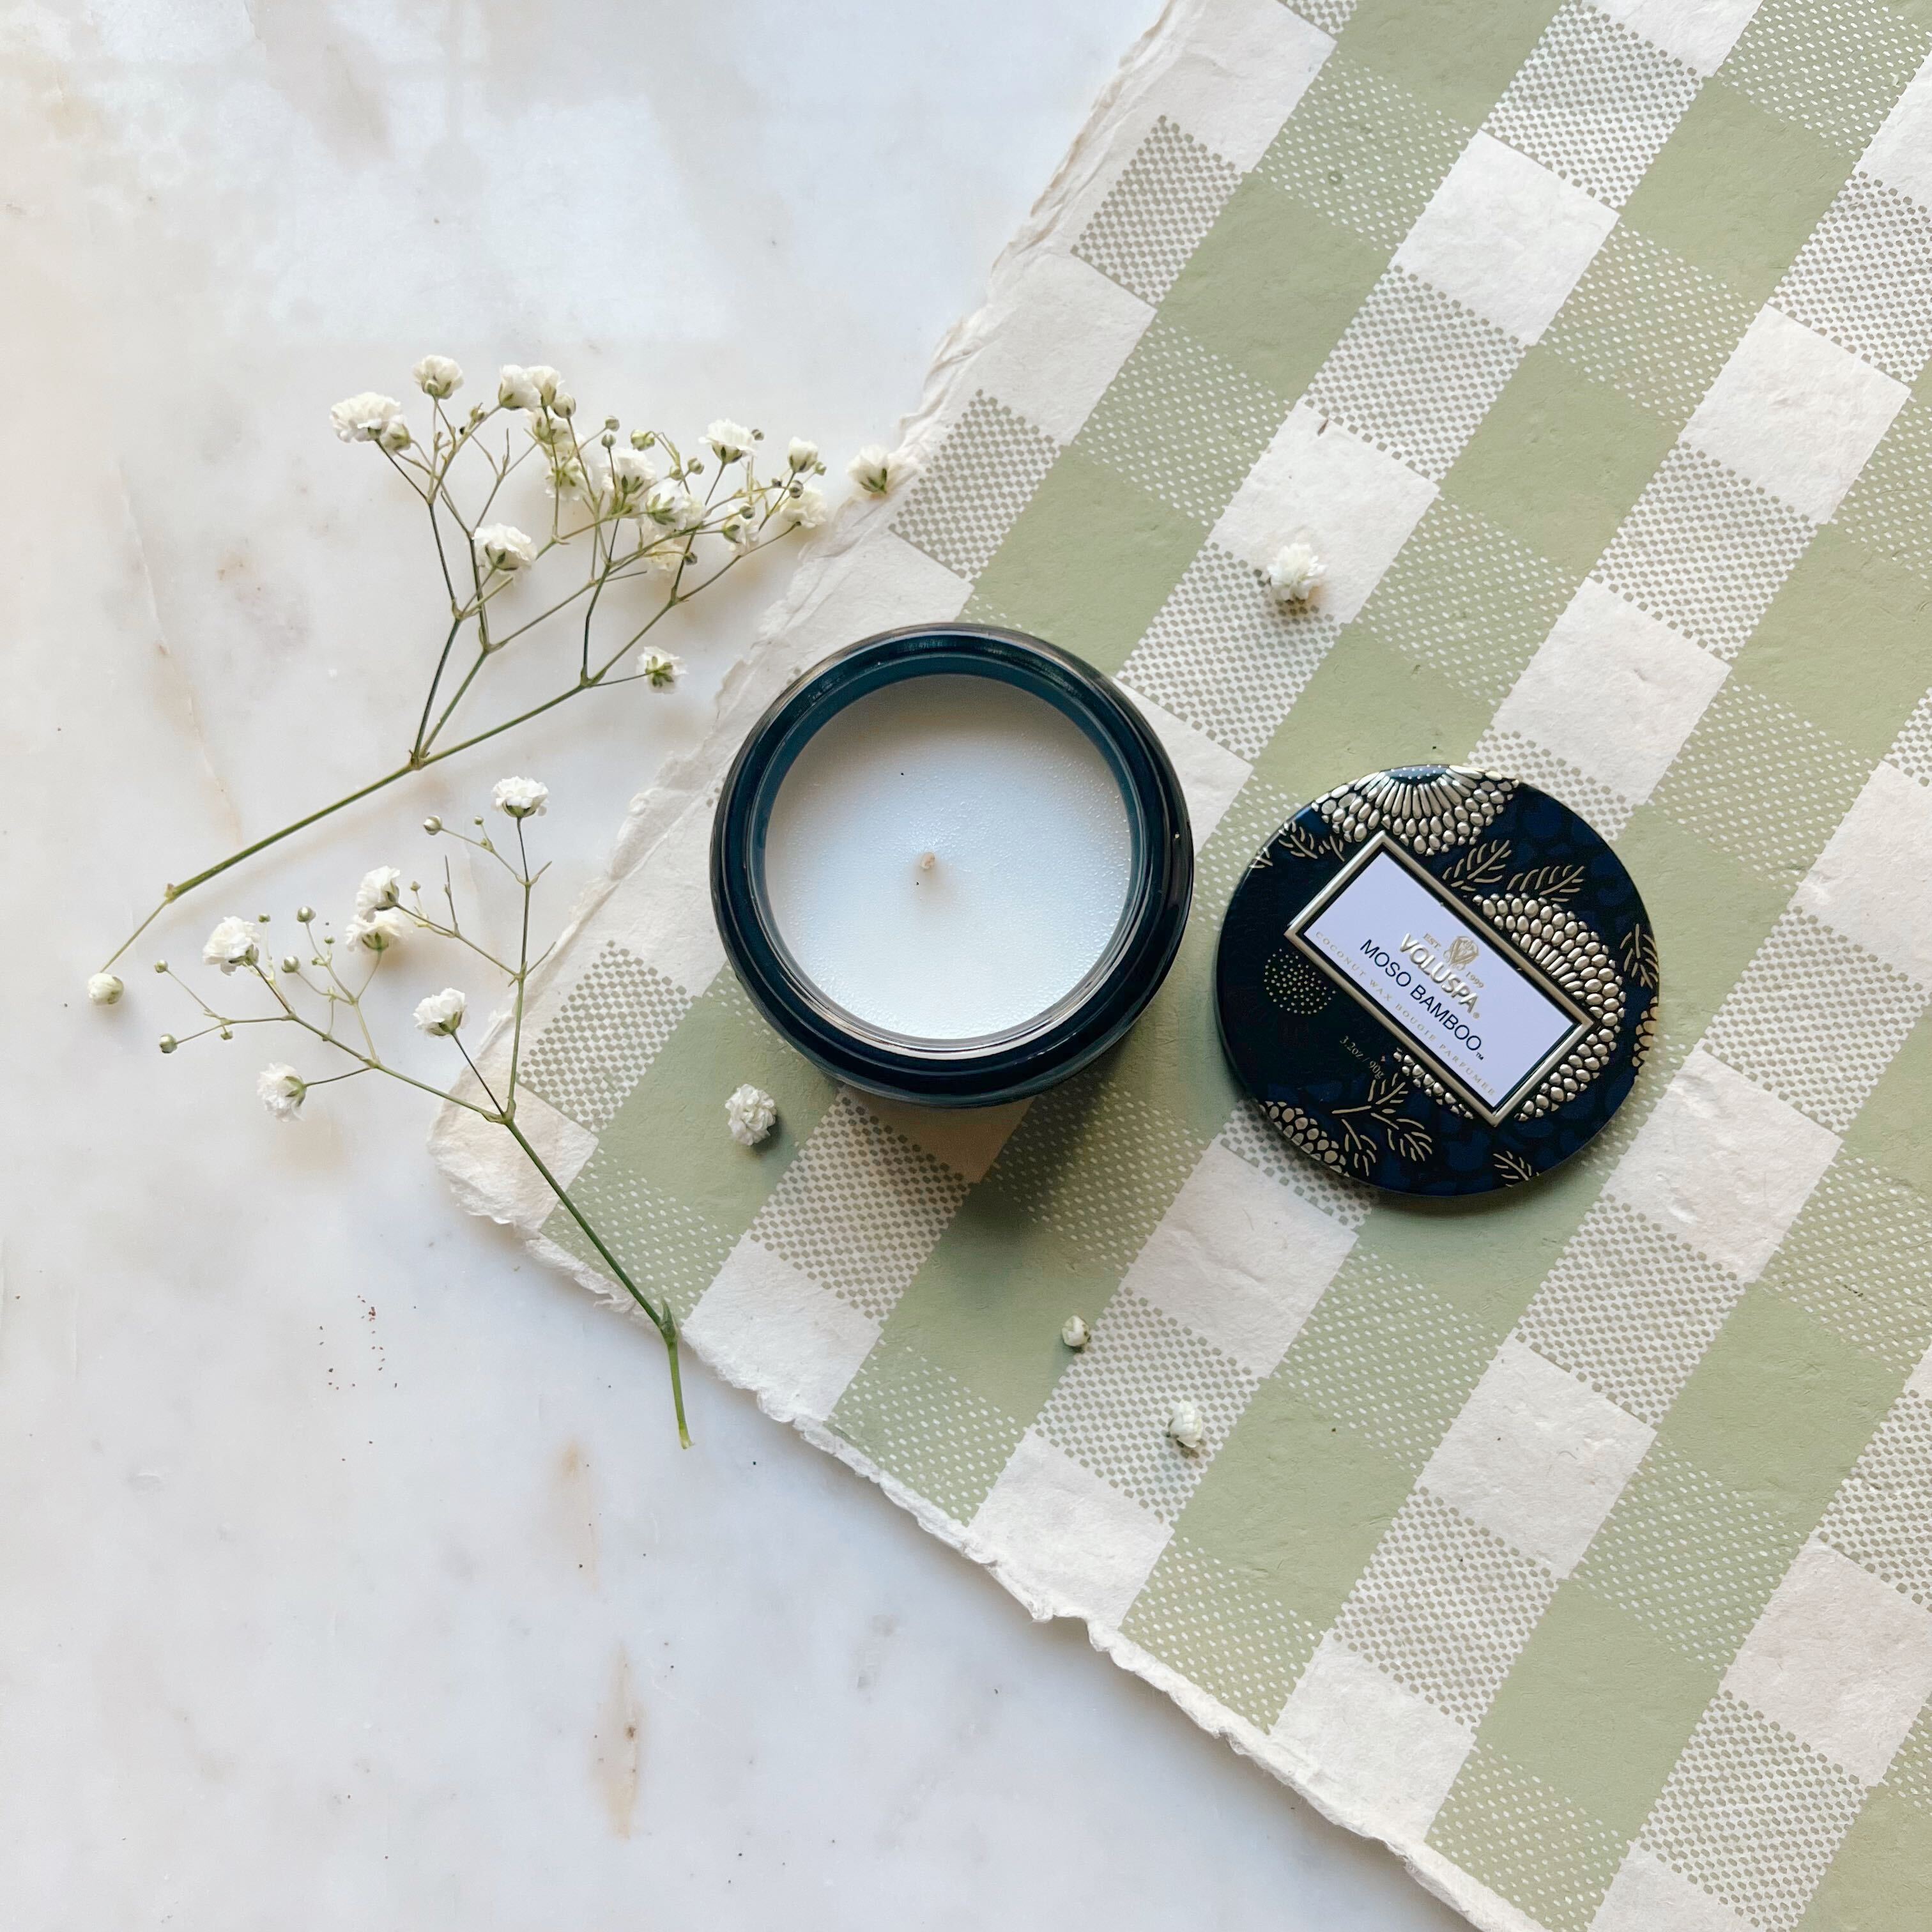 Moso Bamboo glass jar candle with tin lid off to the side, resting on green gingham paper with baby's breath to the side. 